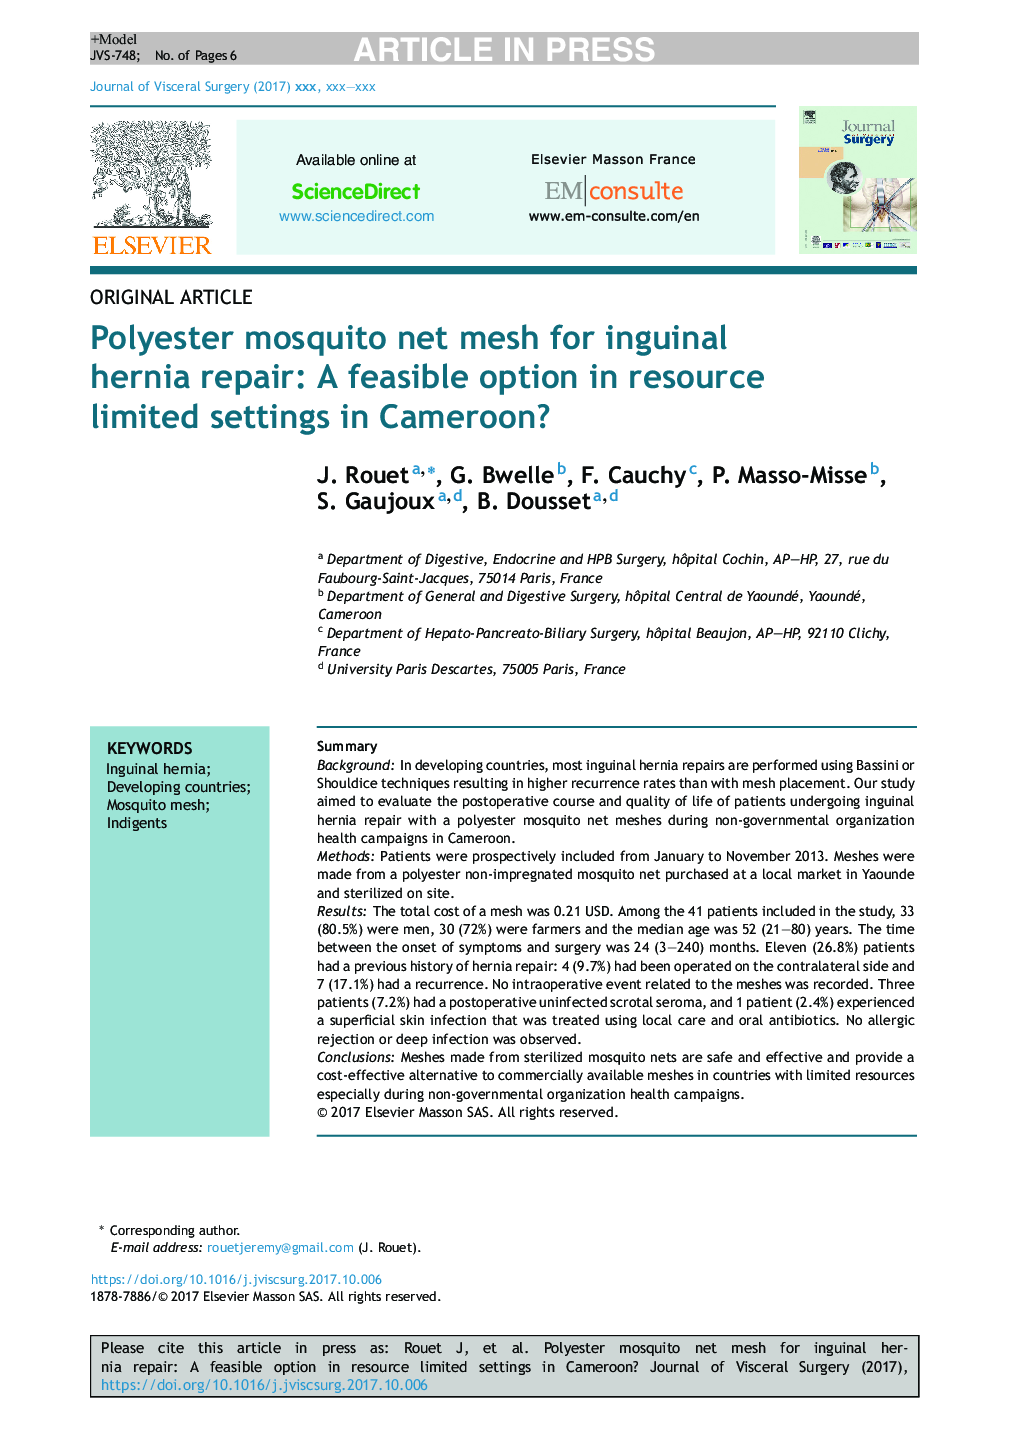 Polyester mosquito net mesh for inguinal hernia repair: A feasible option in resource limited settings in Cameroon?